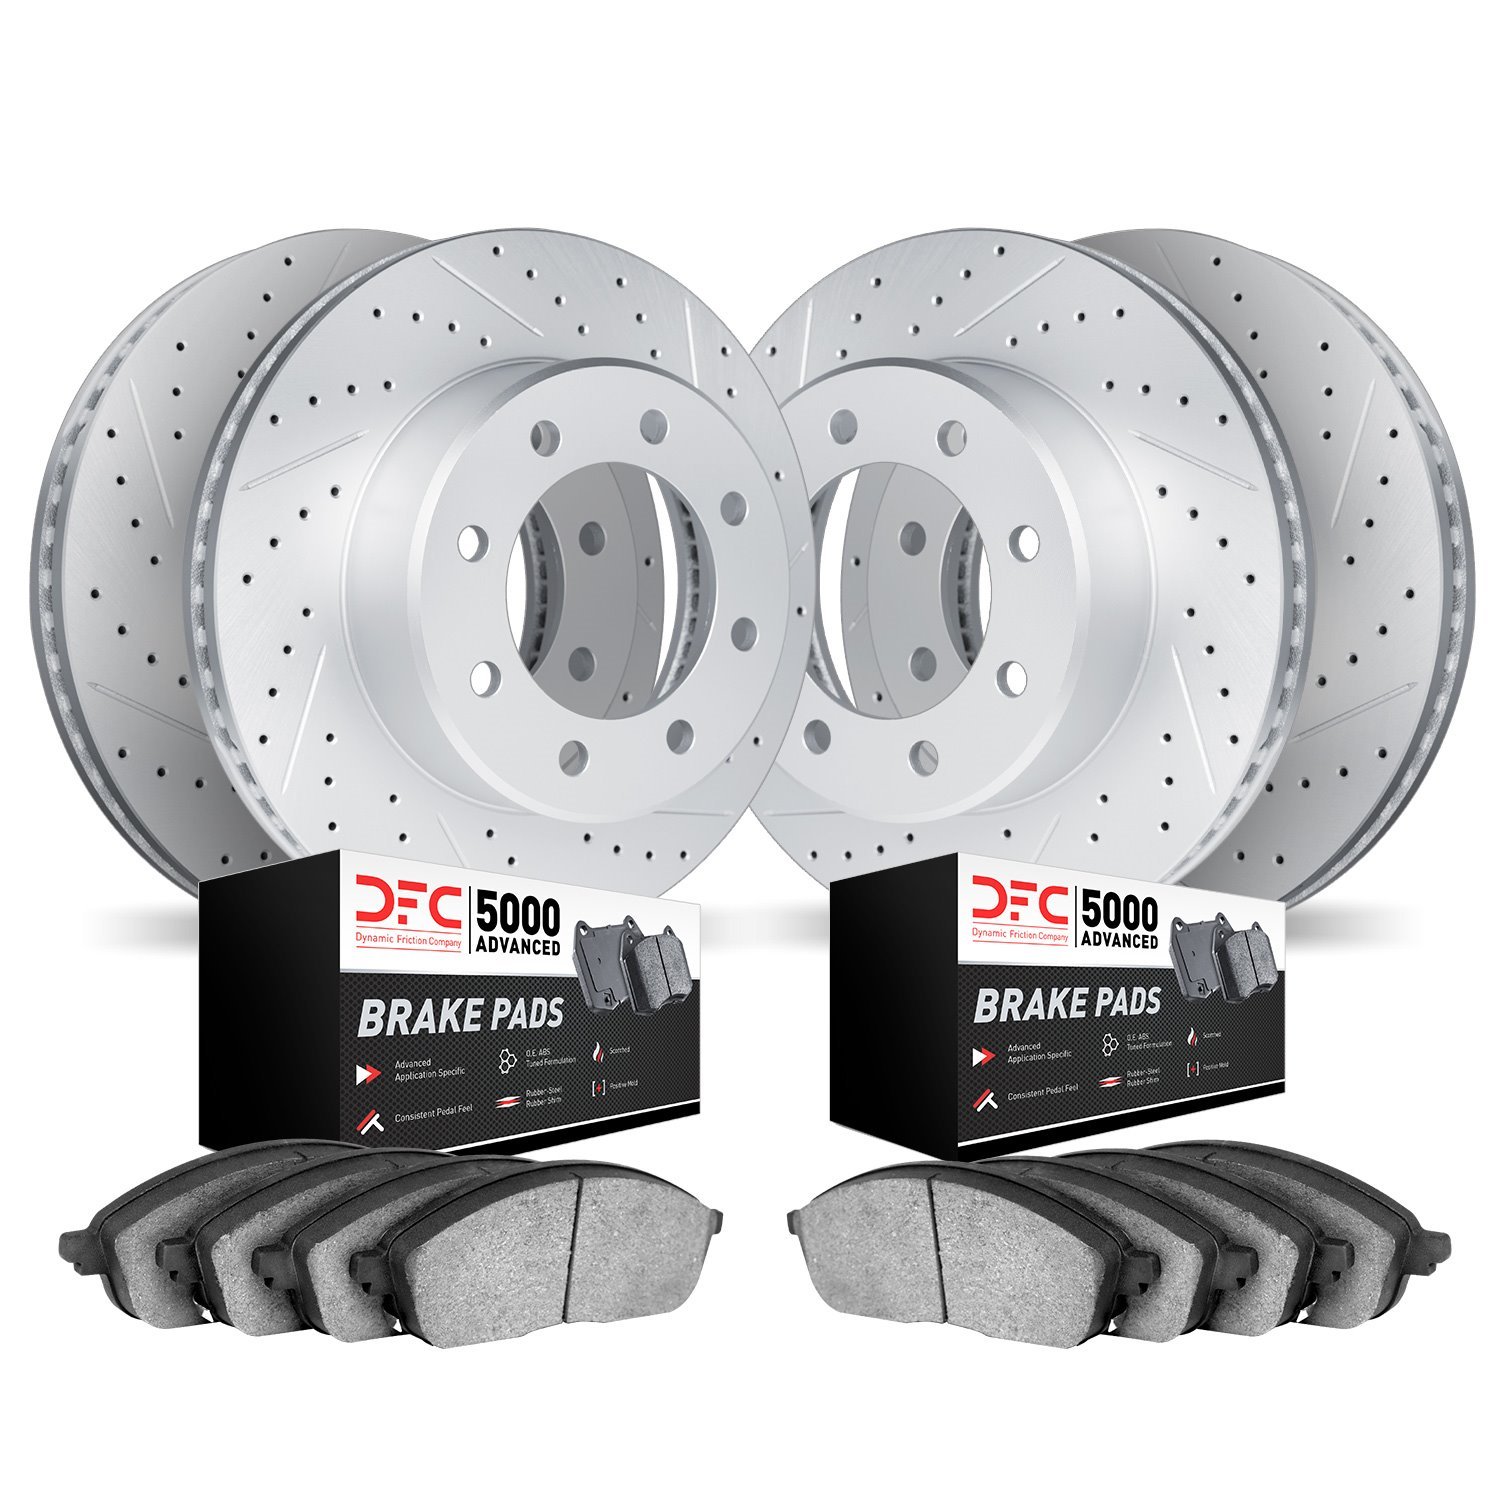 2504-40105 Geoperformance Drilled/Slotted Rotors w/5000 Advanced Brake Pads Kit, Fits Select Mopar, Position: Front and Rear